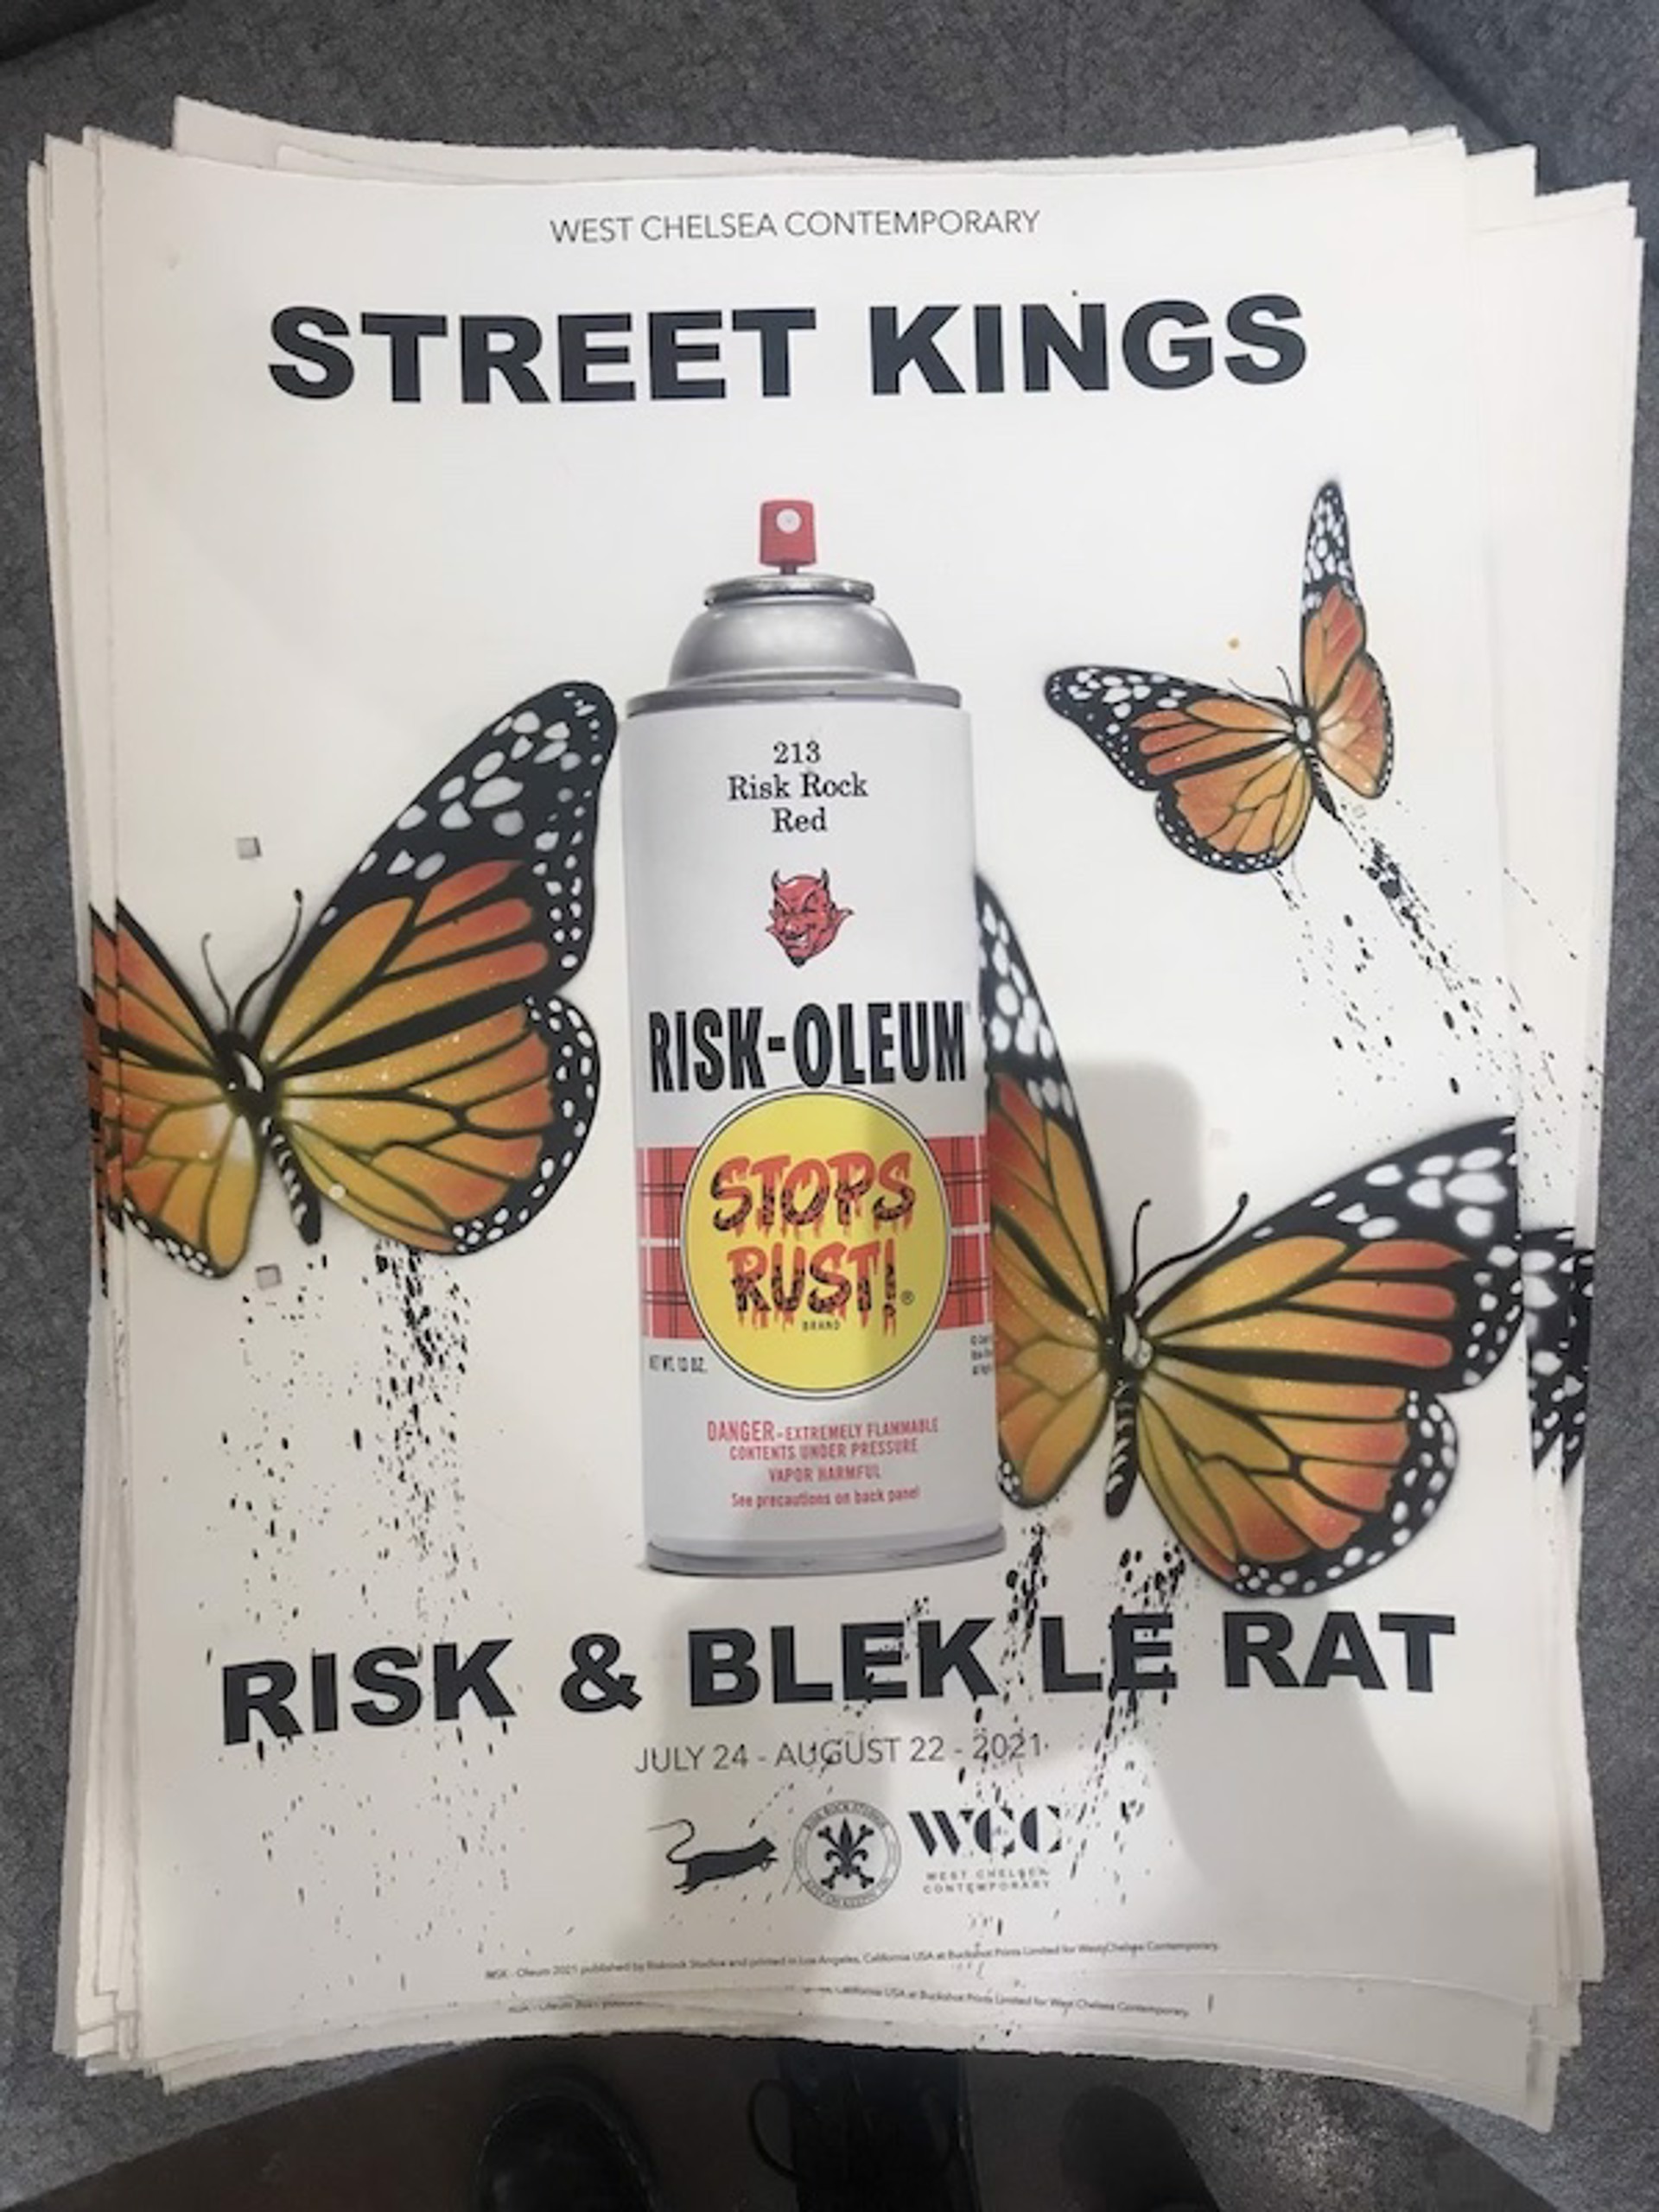 Street Kings Show Print (48/50) by Risk